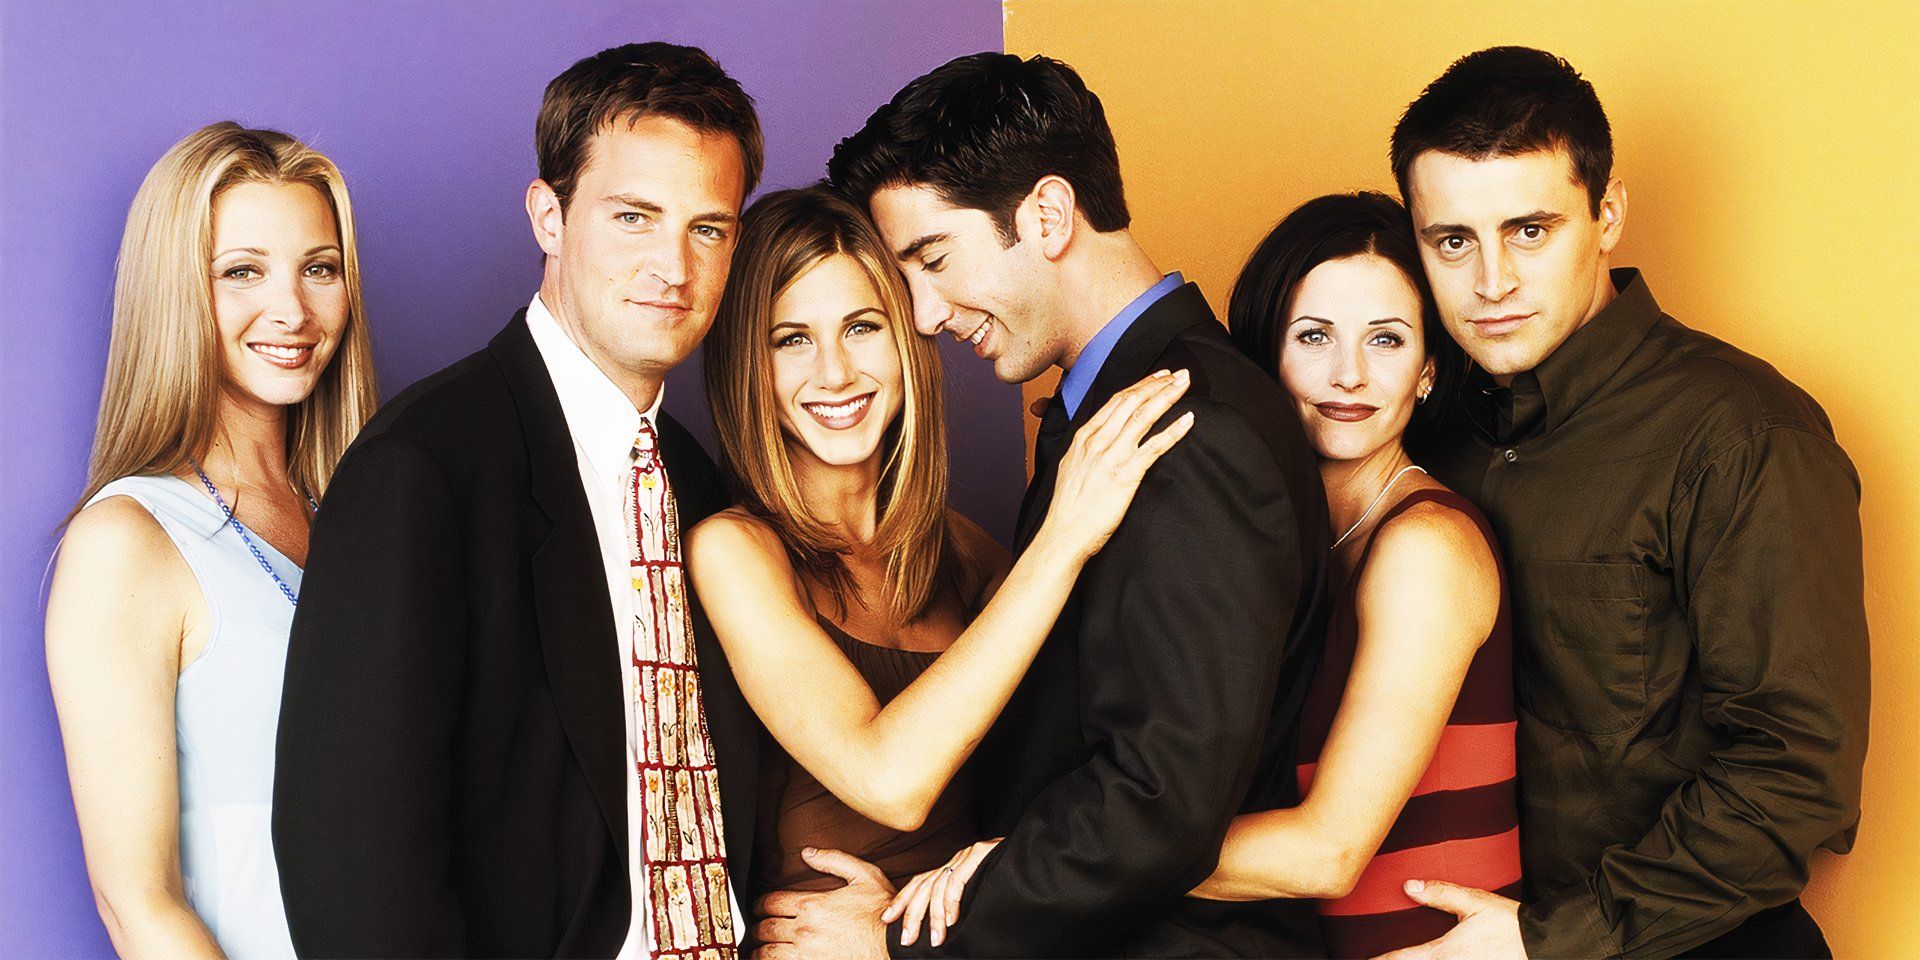 The cast of Friends standing together in a promotional photo